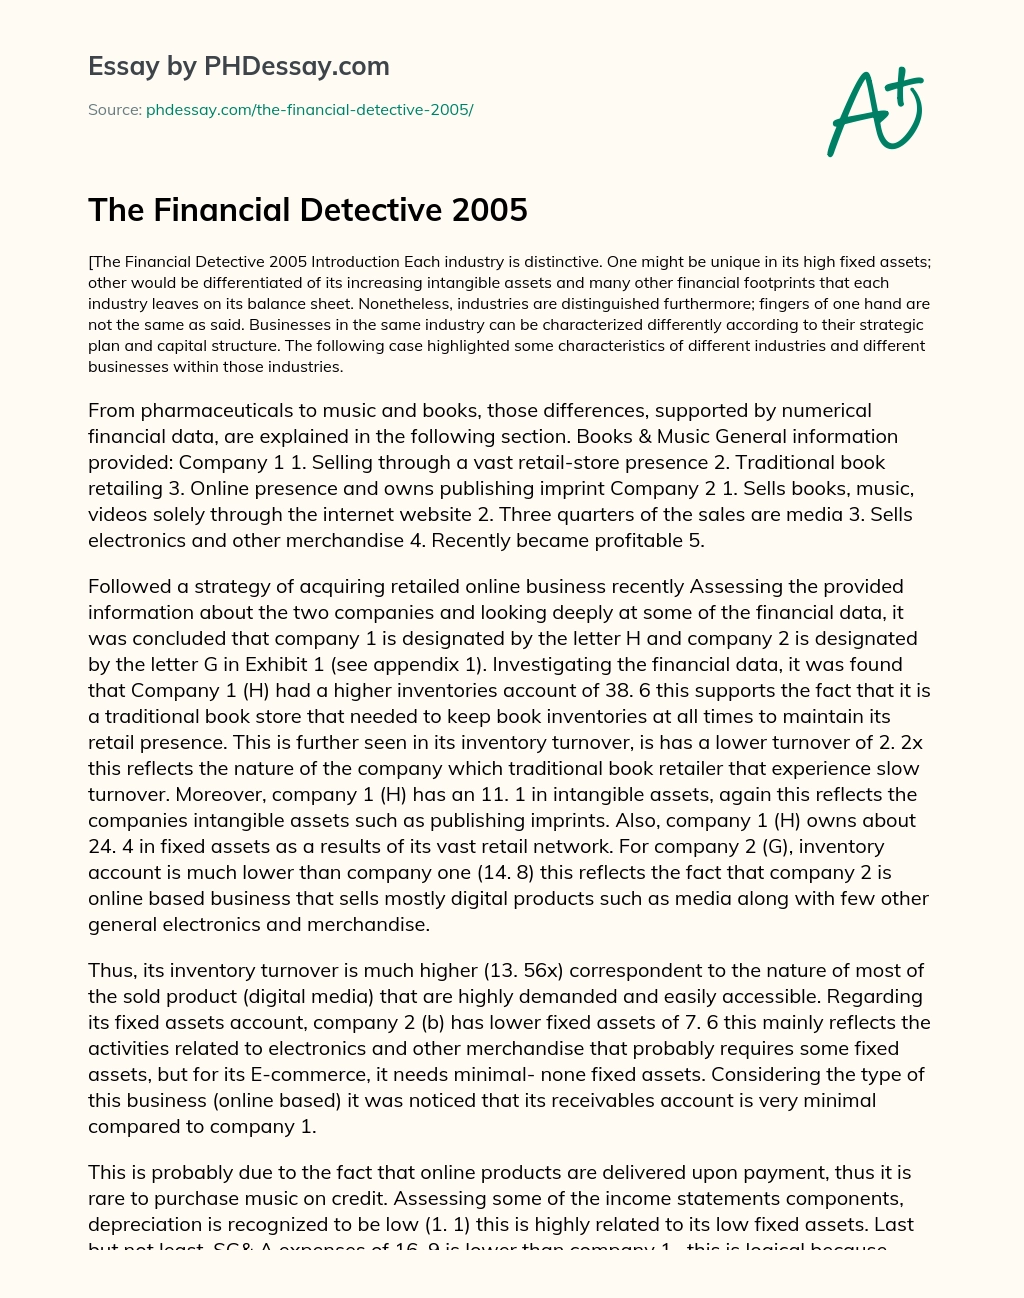 The Financial Detective 2005 essay